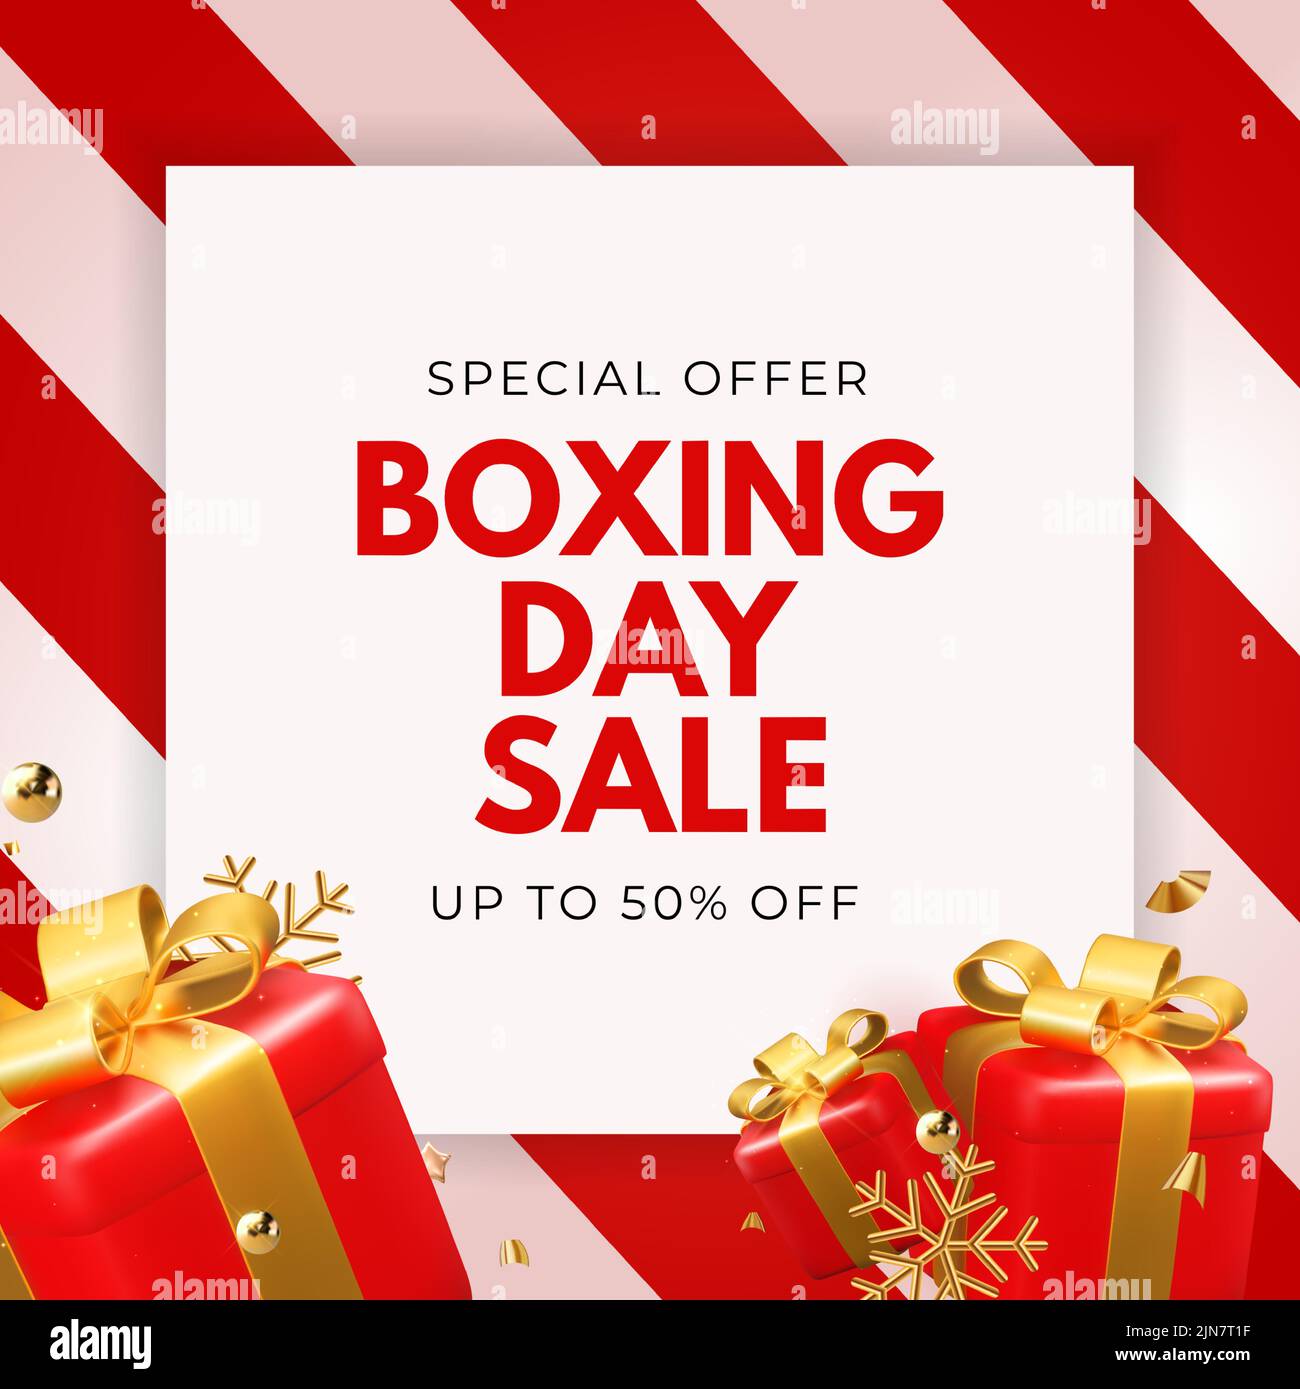 Red Boxing Day Sale Vector Illustration. EPS10 Stock Vector